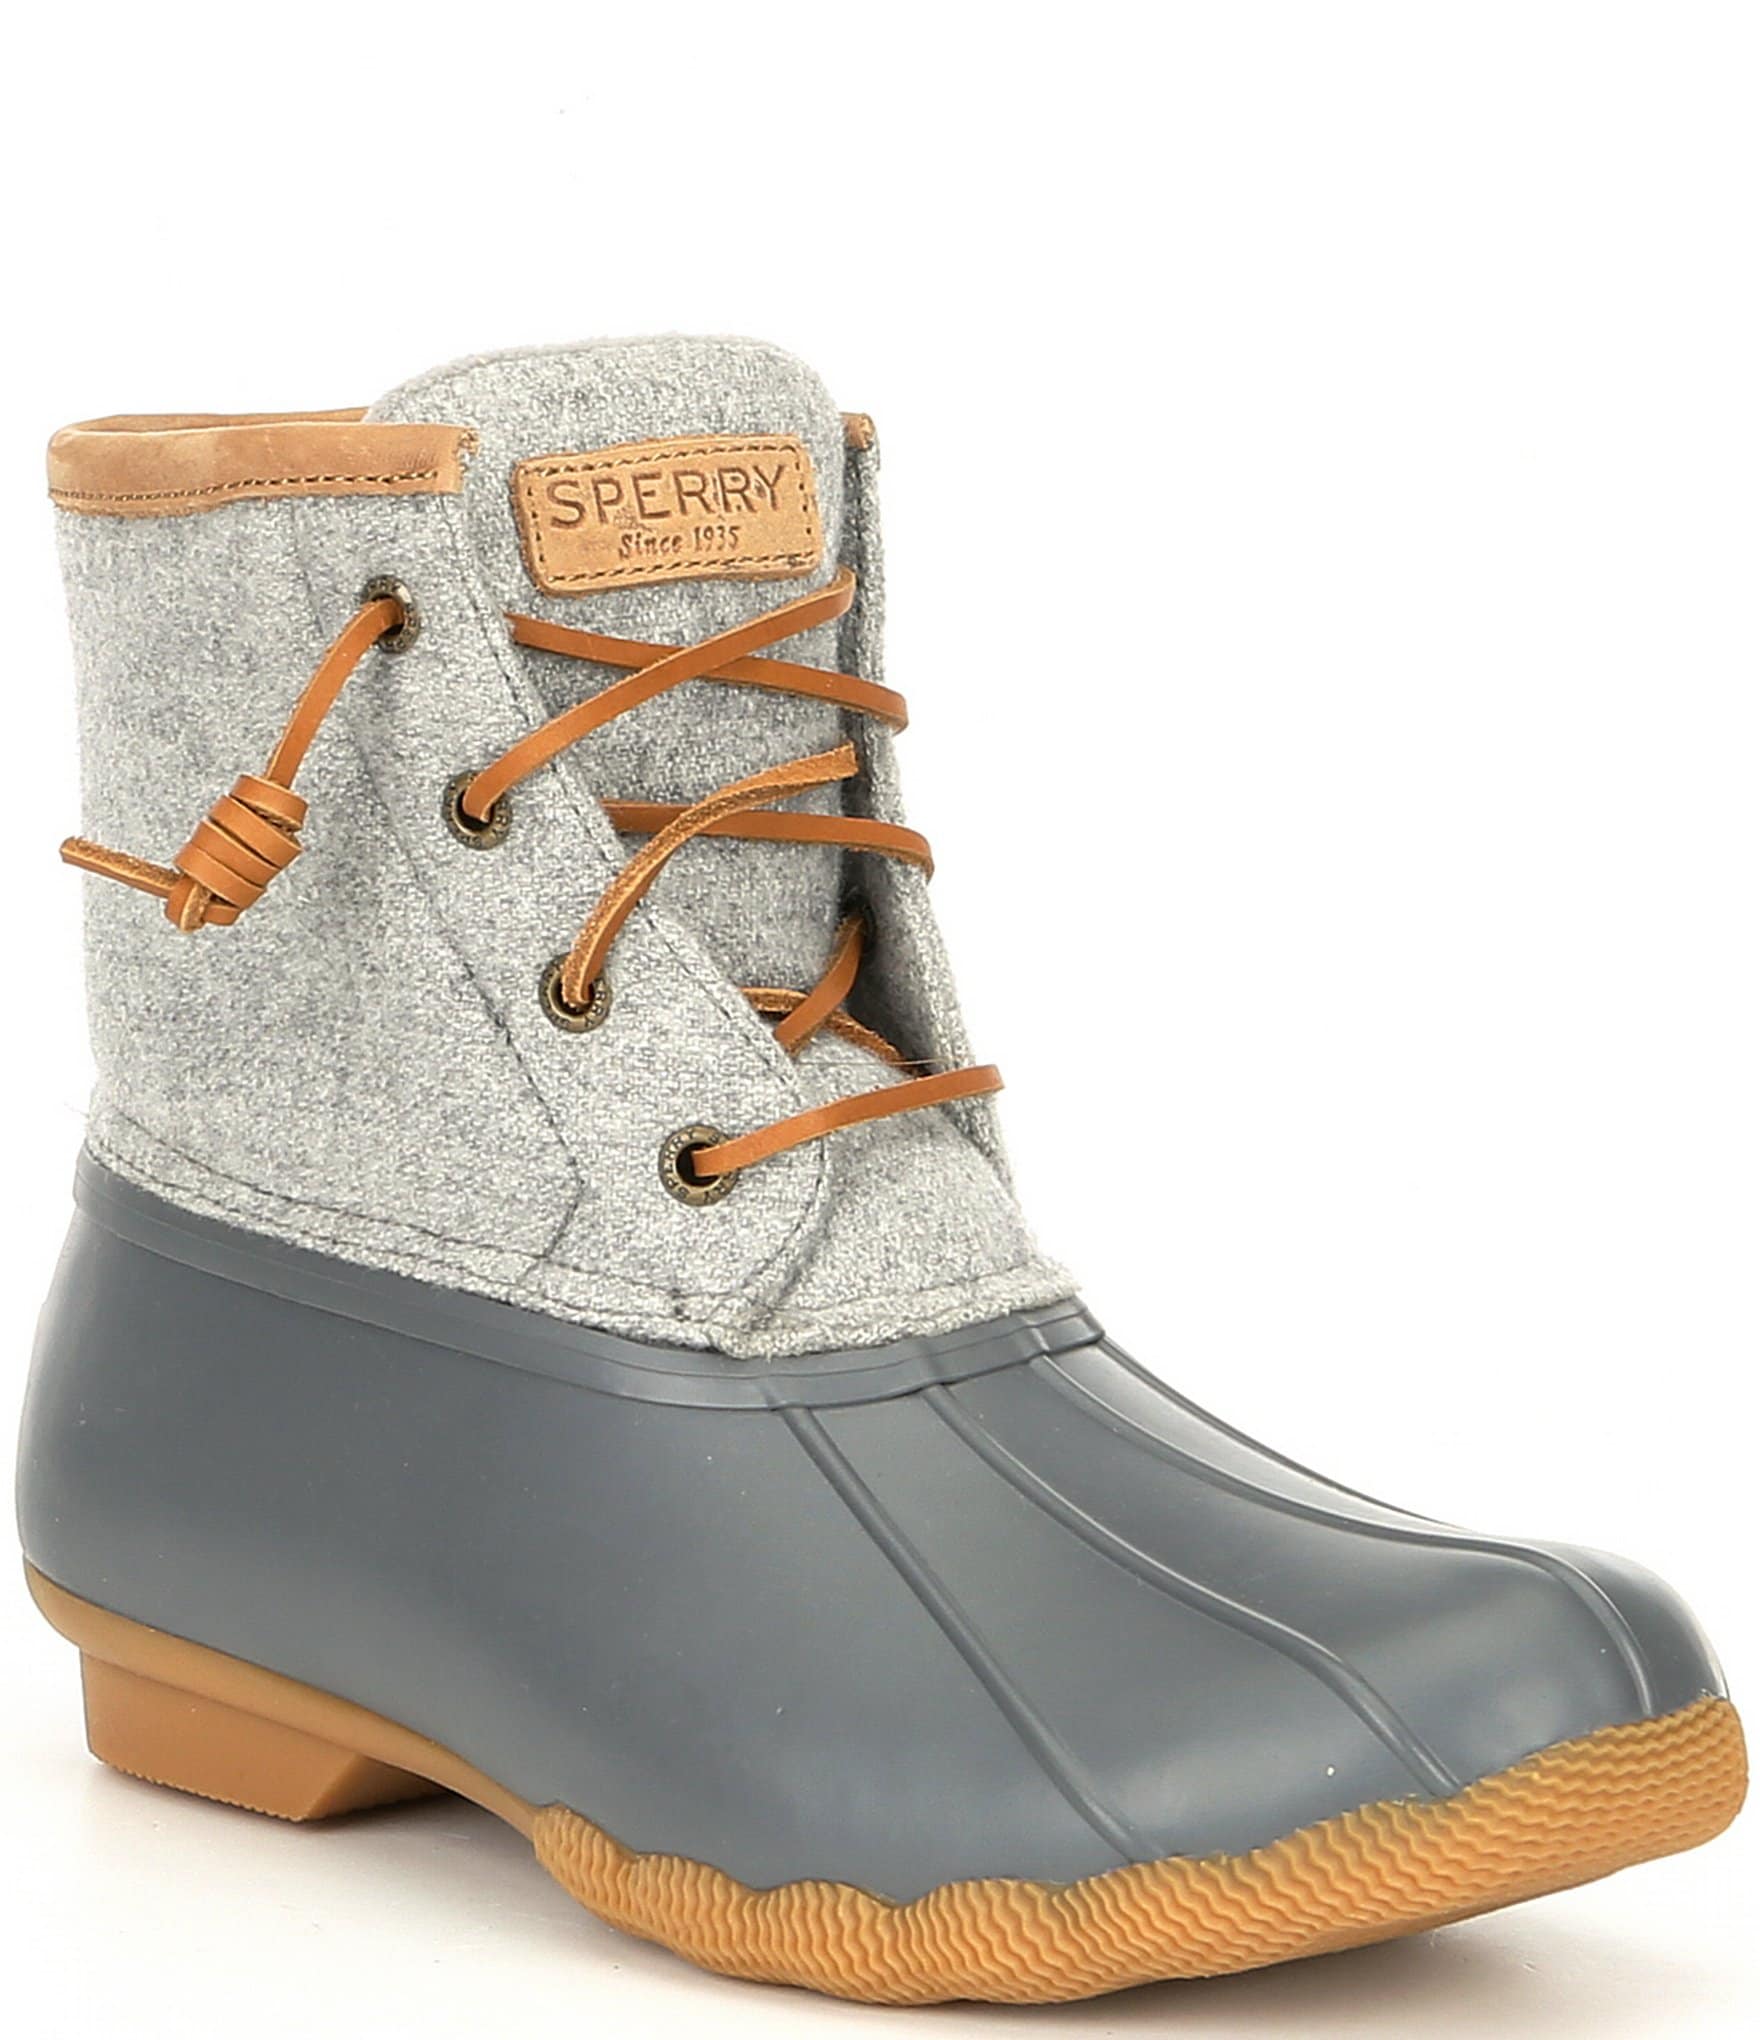 sperry teal duck boots